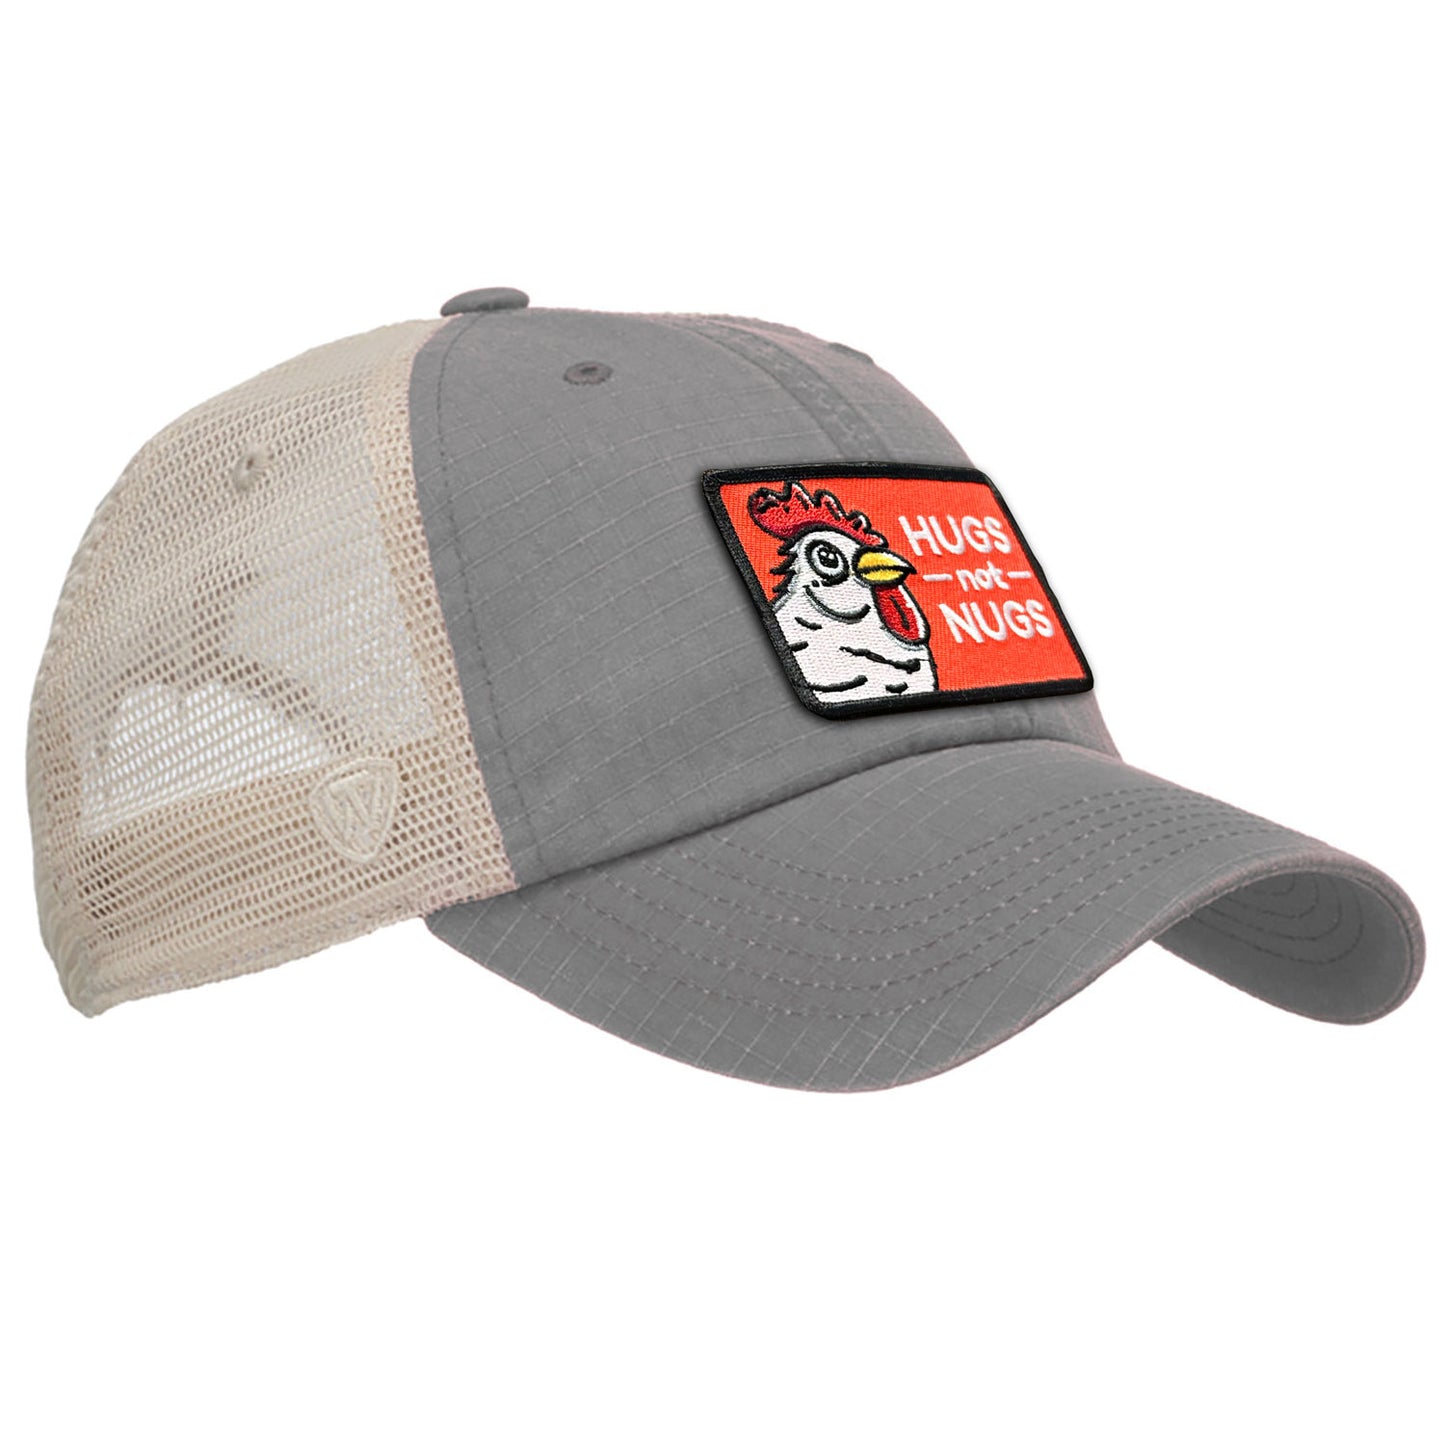 Hugs Not Nugs Snap-Back Vintage Trucker Hat - Available in 5 Colors!